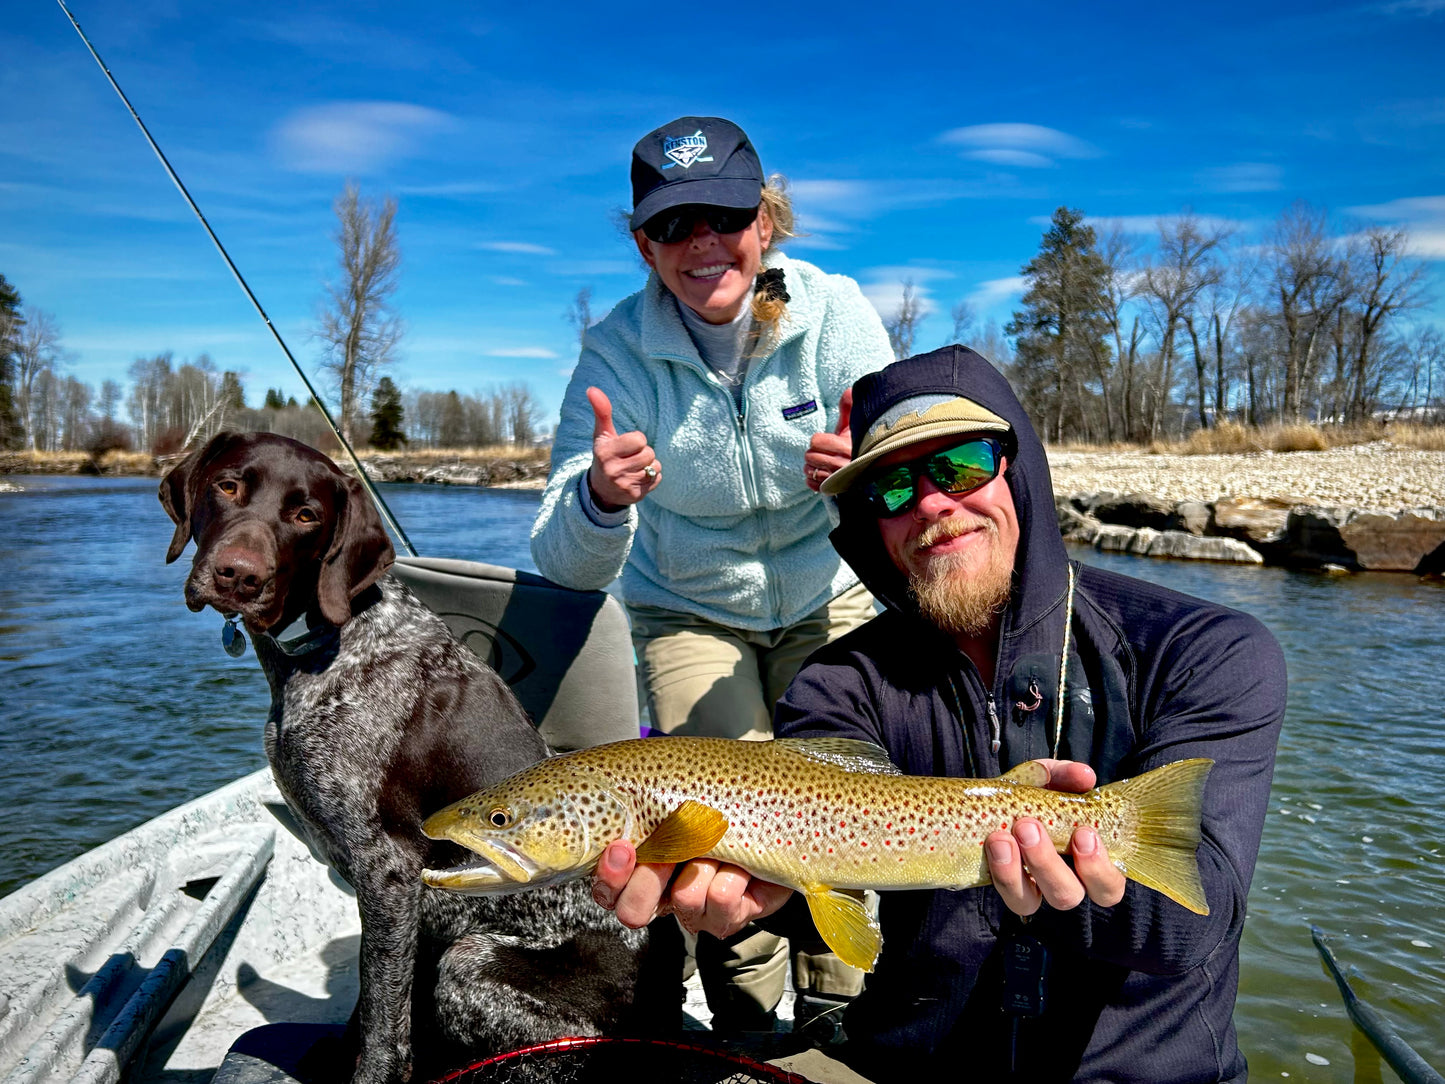 Guided Fly Fishing Float (up to 2 people)